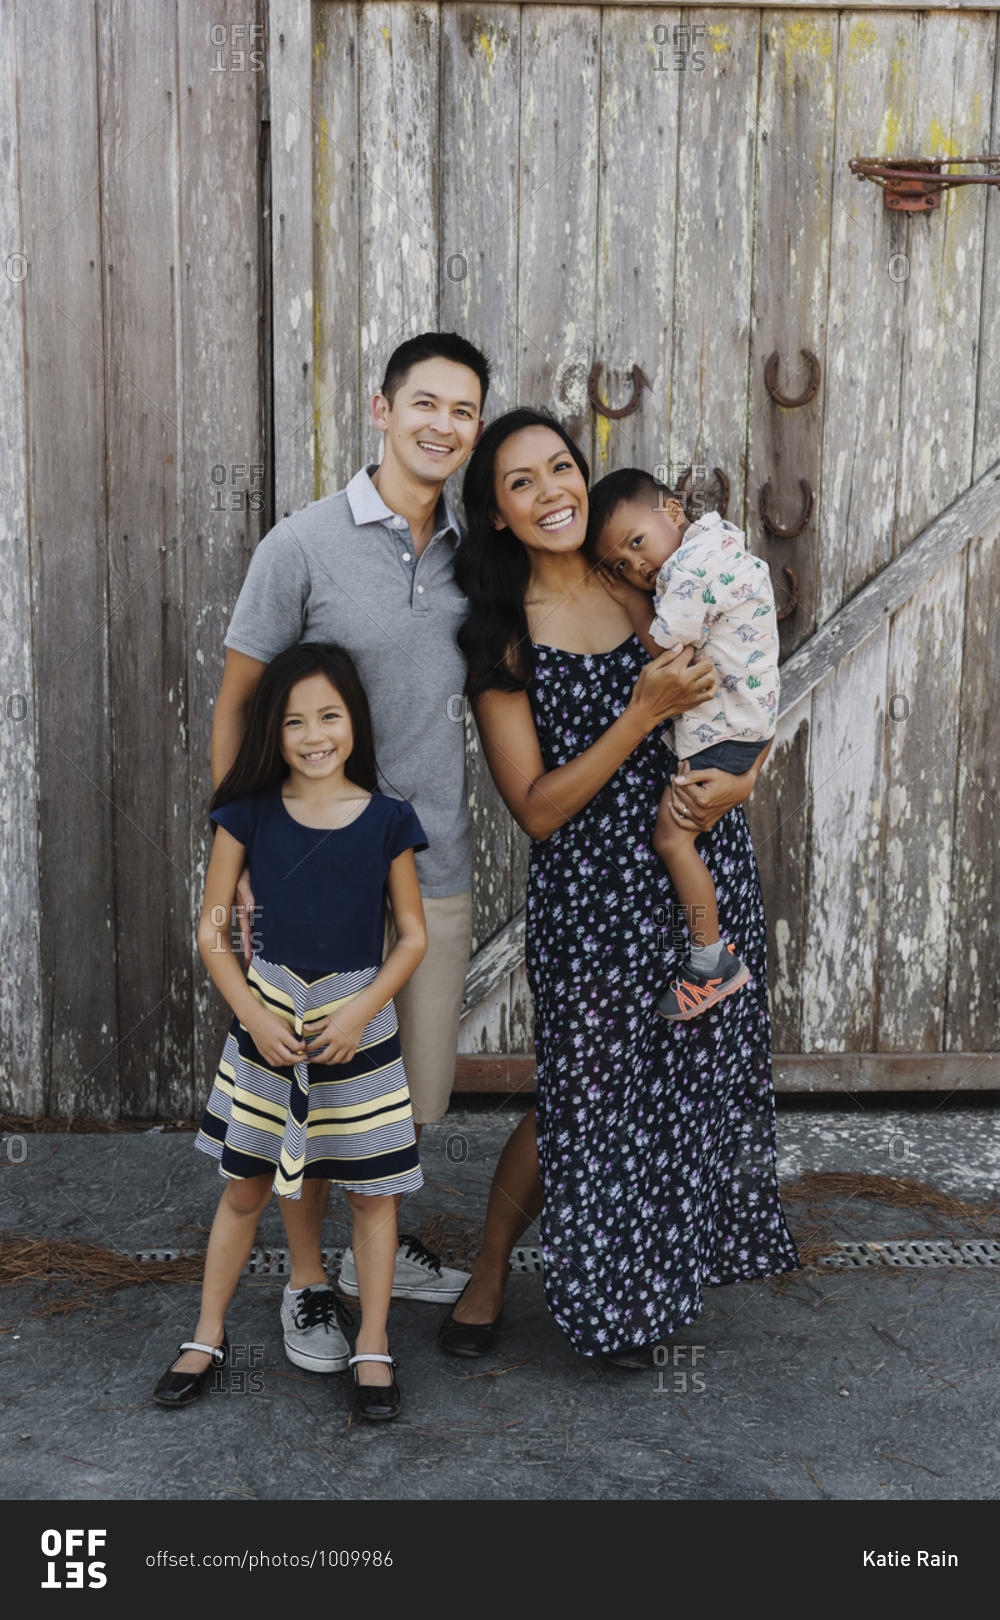 Mom and dad with daughter and toddler boy in front of an old wooden barn